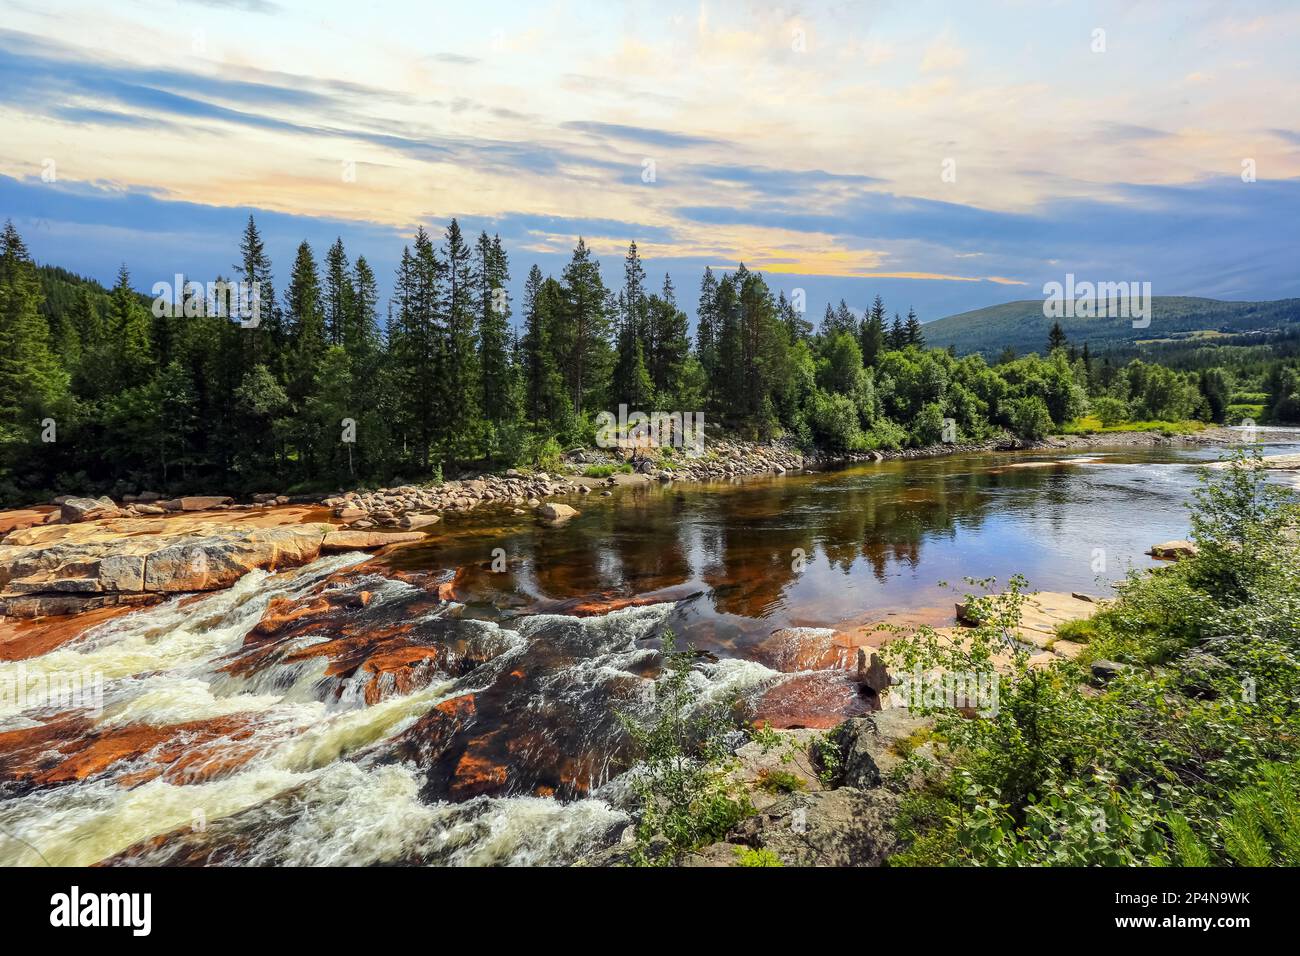 Stream  at the river Glomma  located in the central part of Norway Stock Photo